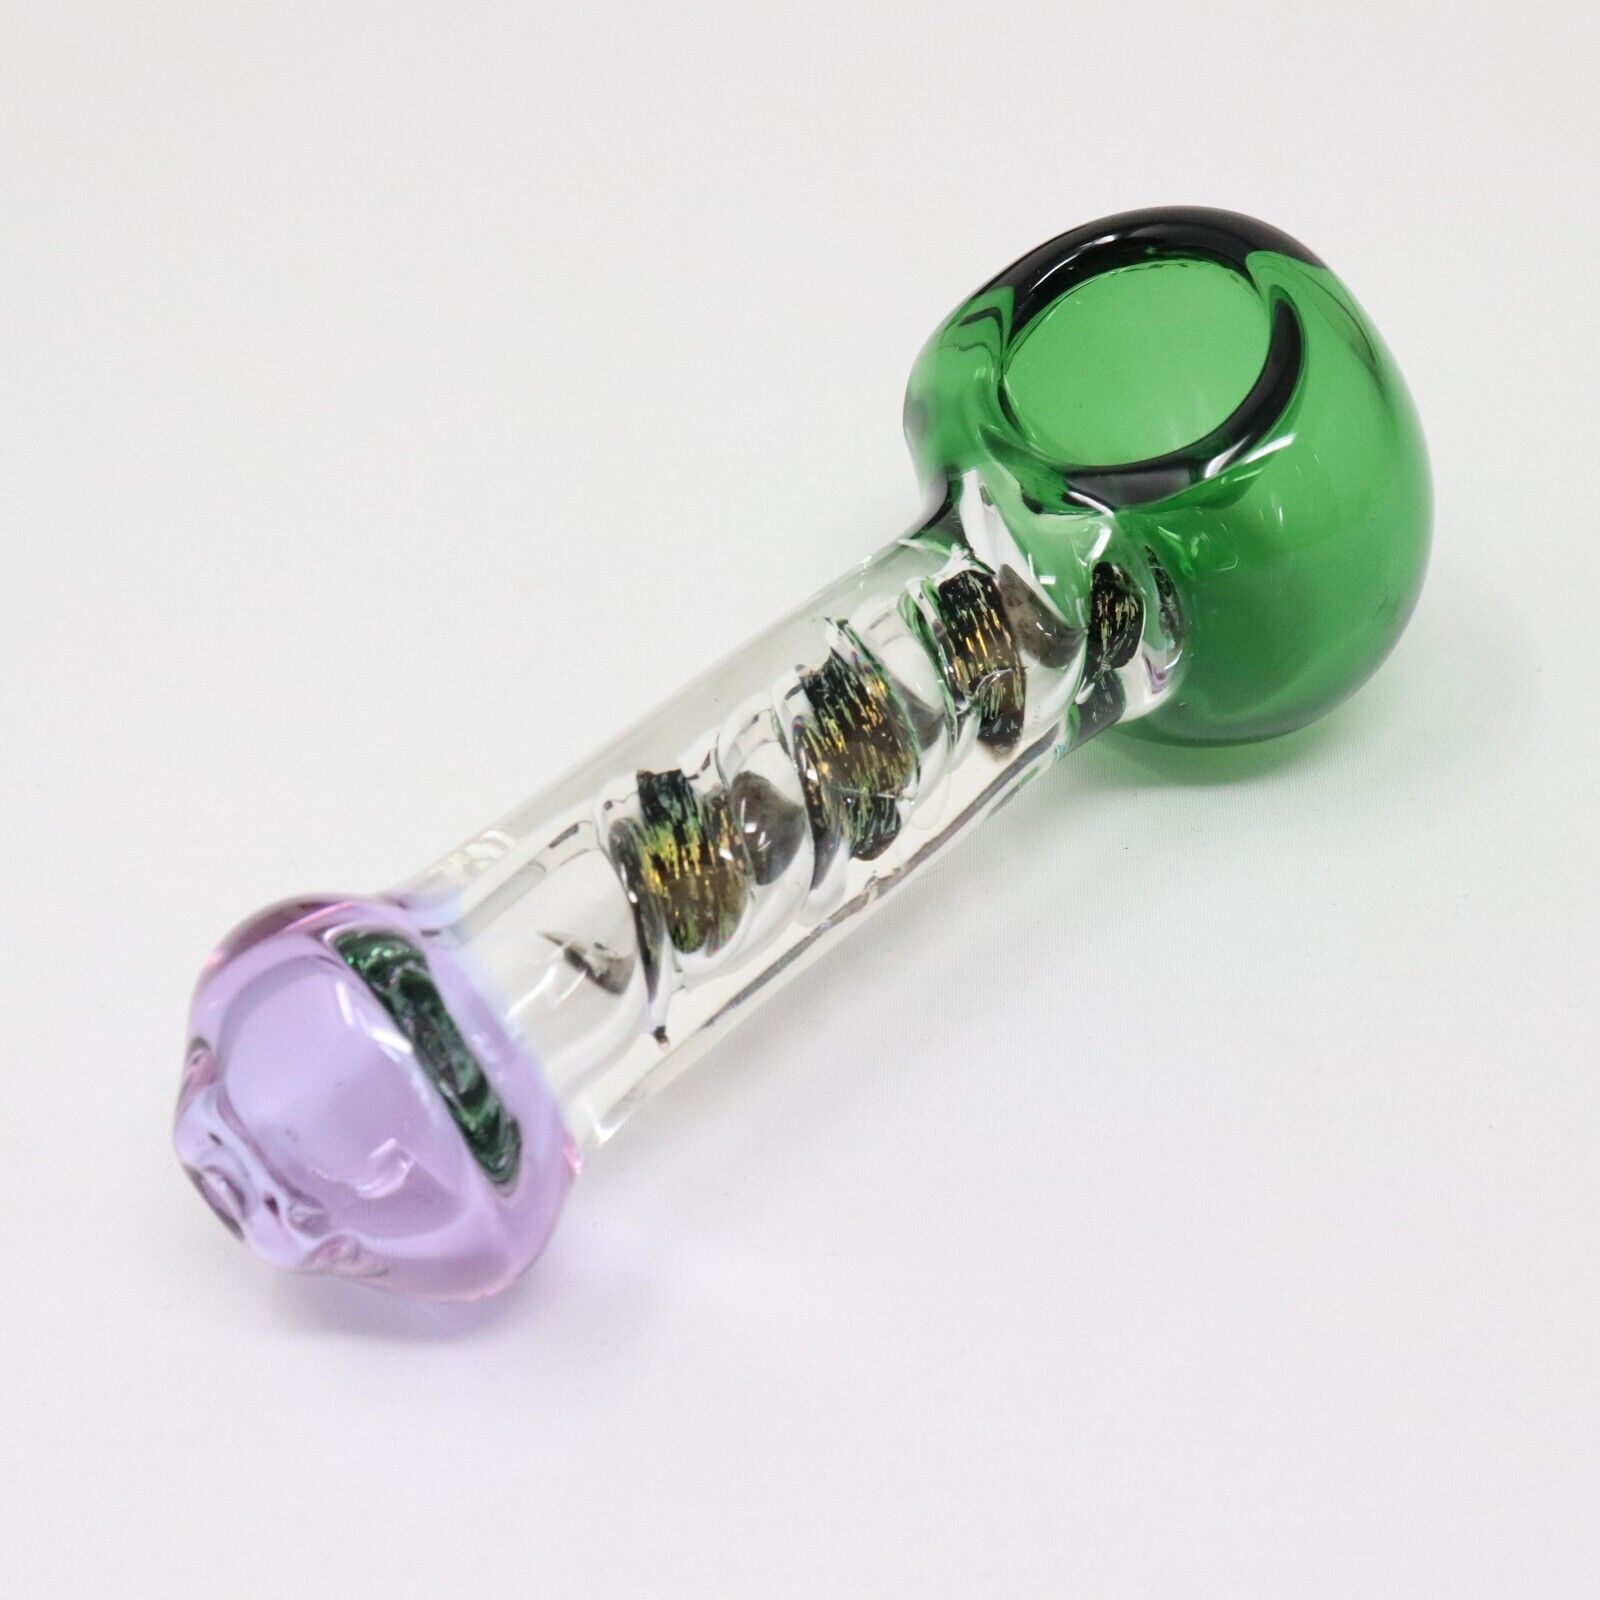 4.5 GREEN PURPLE DICHRO GLASS PIPE SMOKING HERB HAND PIPES SMB-0001. Available Now for 16.99